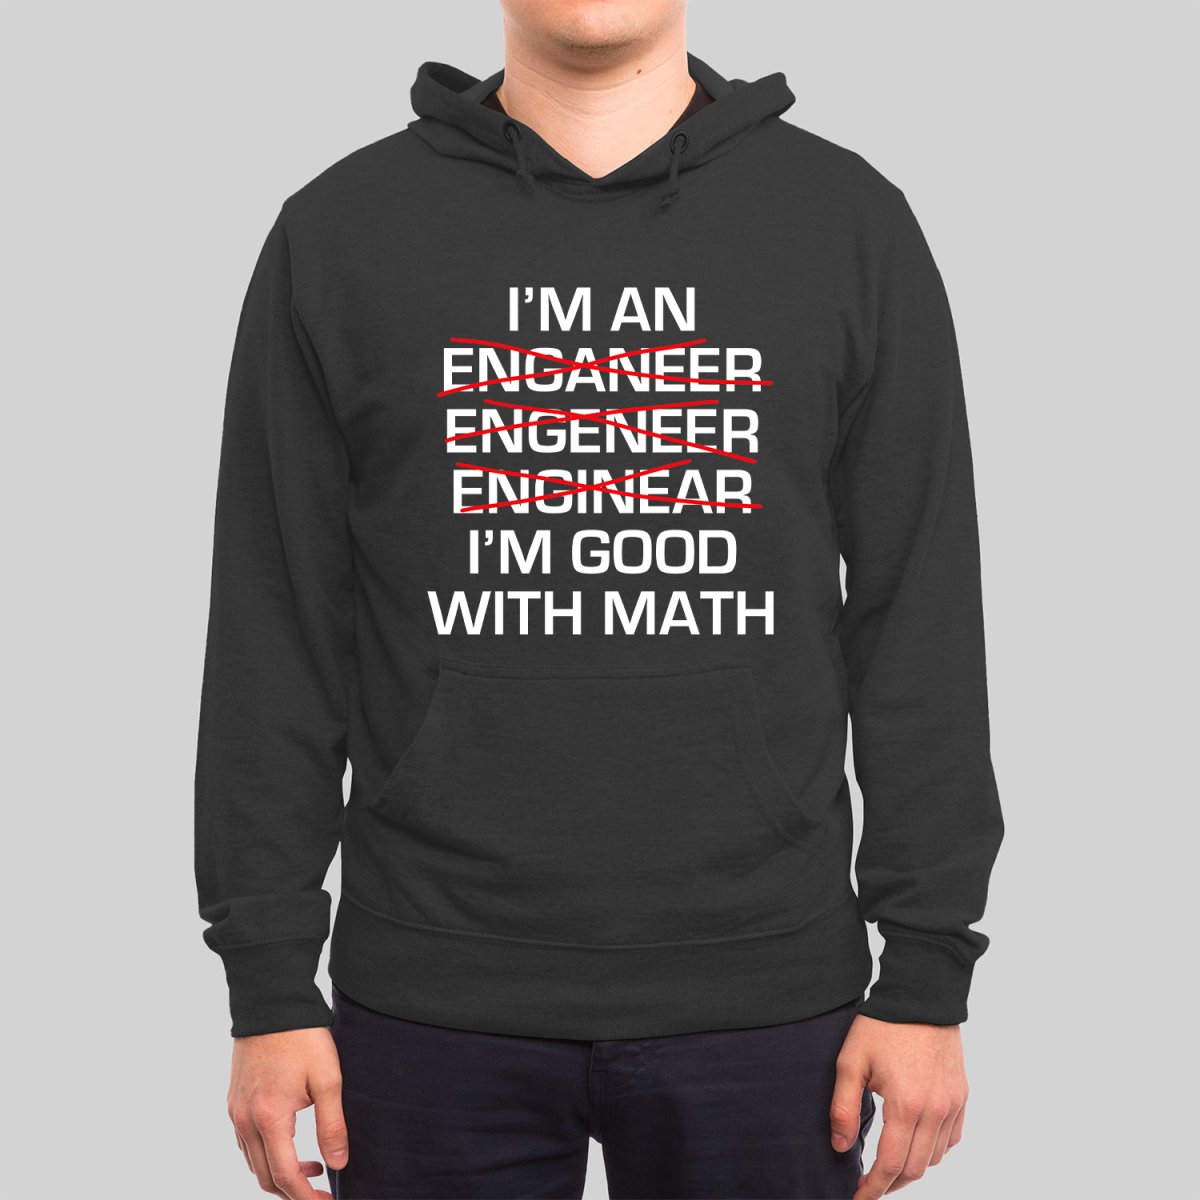 I'm Good With Math Hoodie - Geeksoutfit